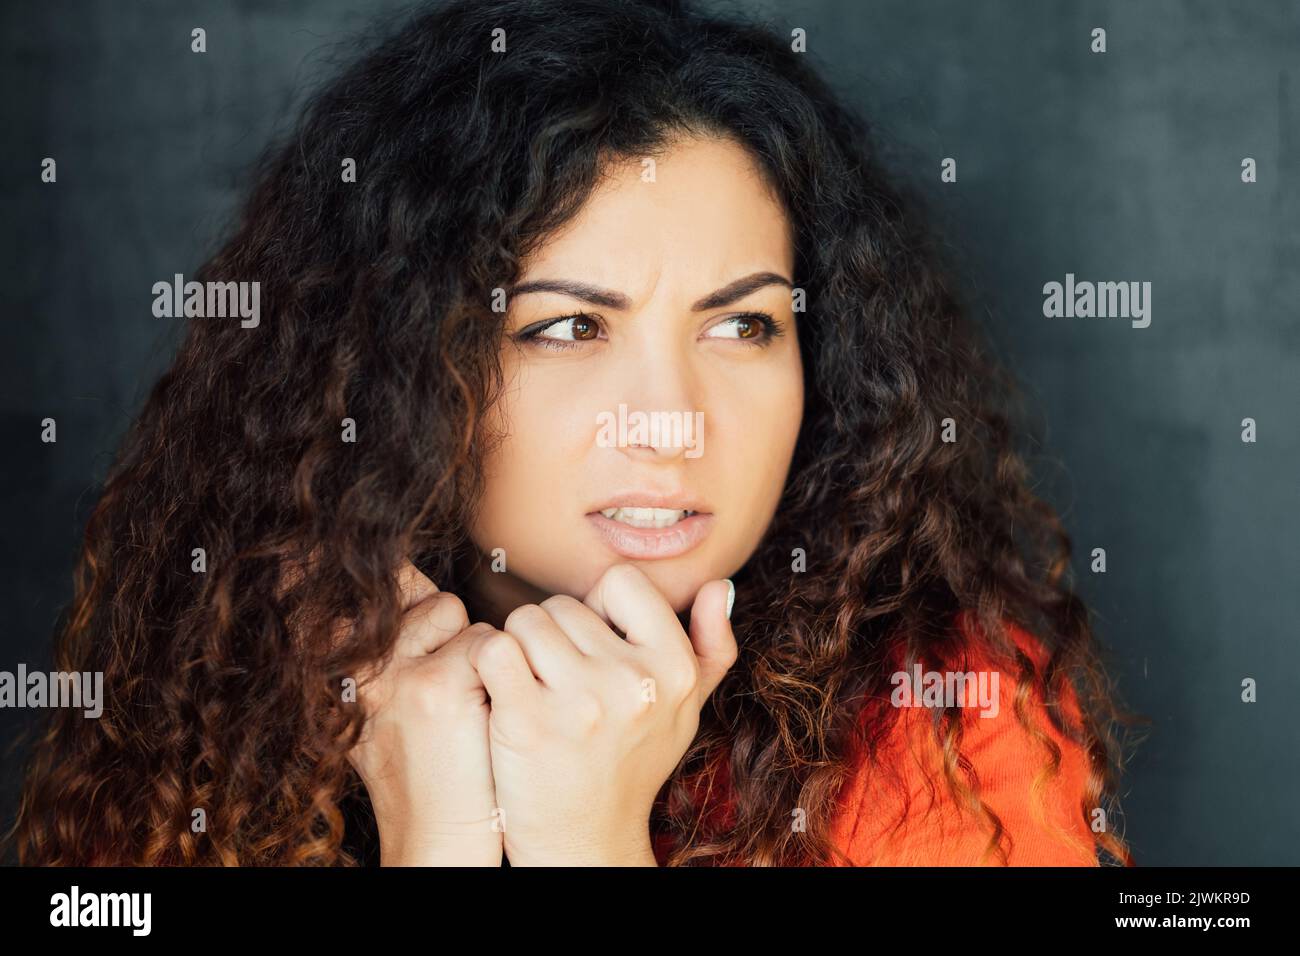 young woman worried concerned fear anxiety Stock Photo